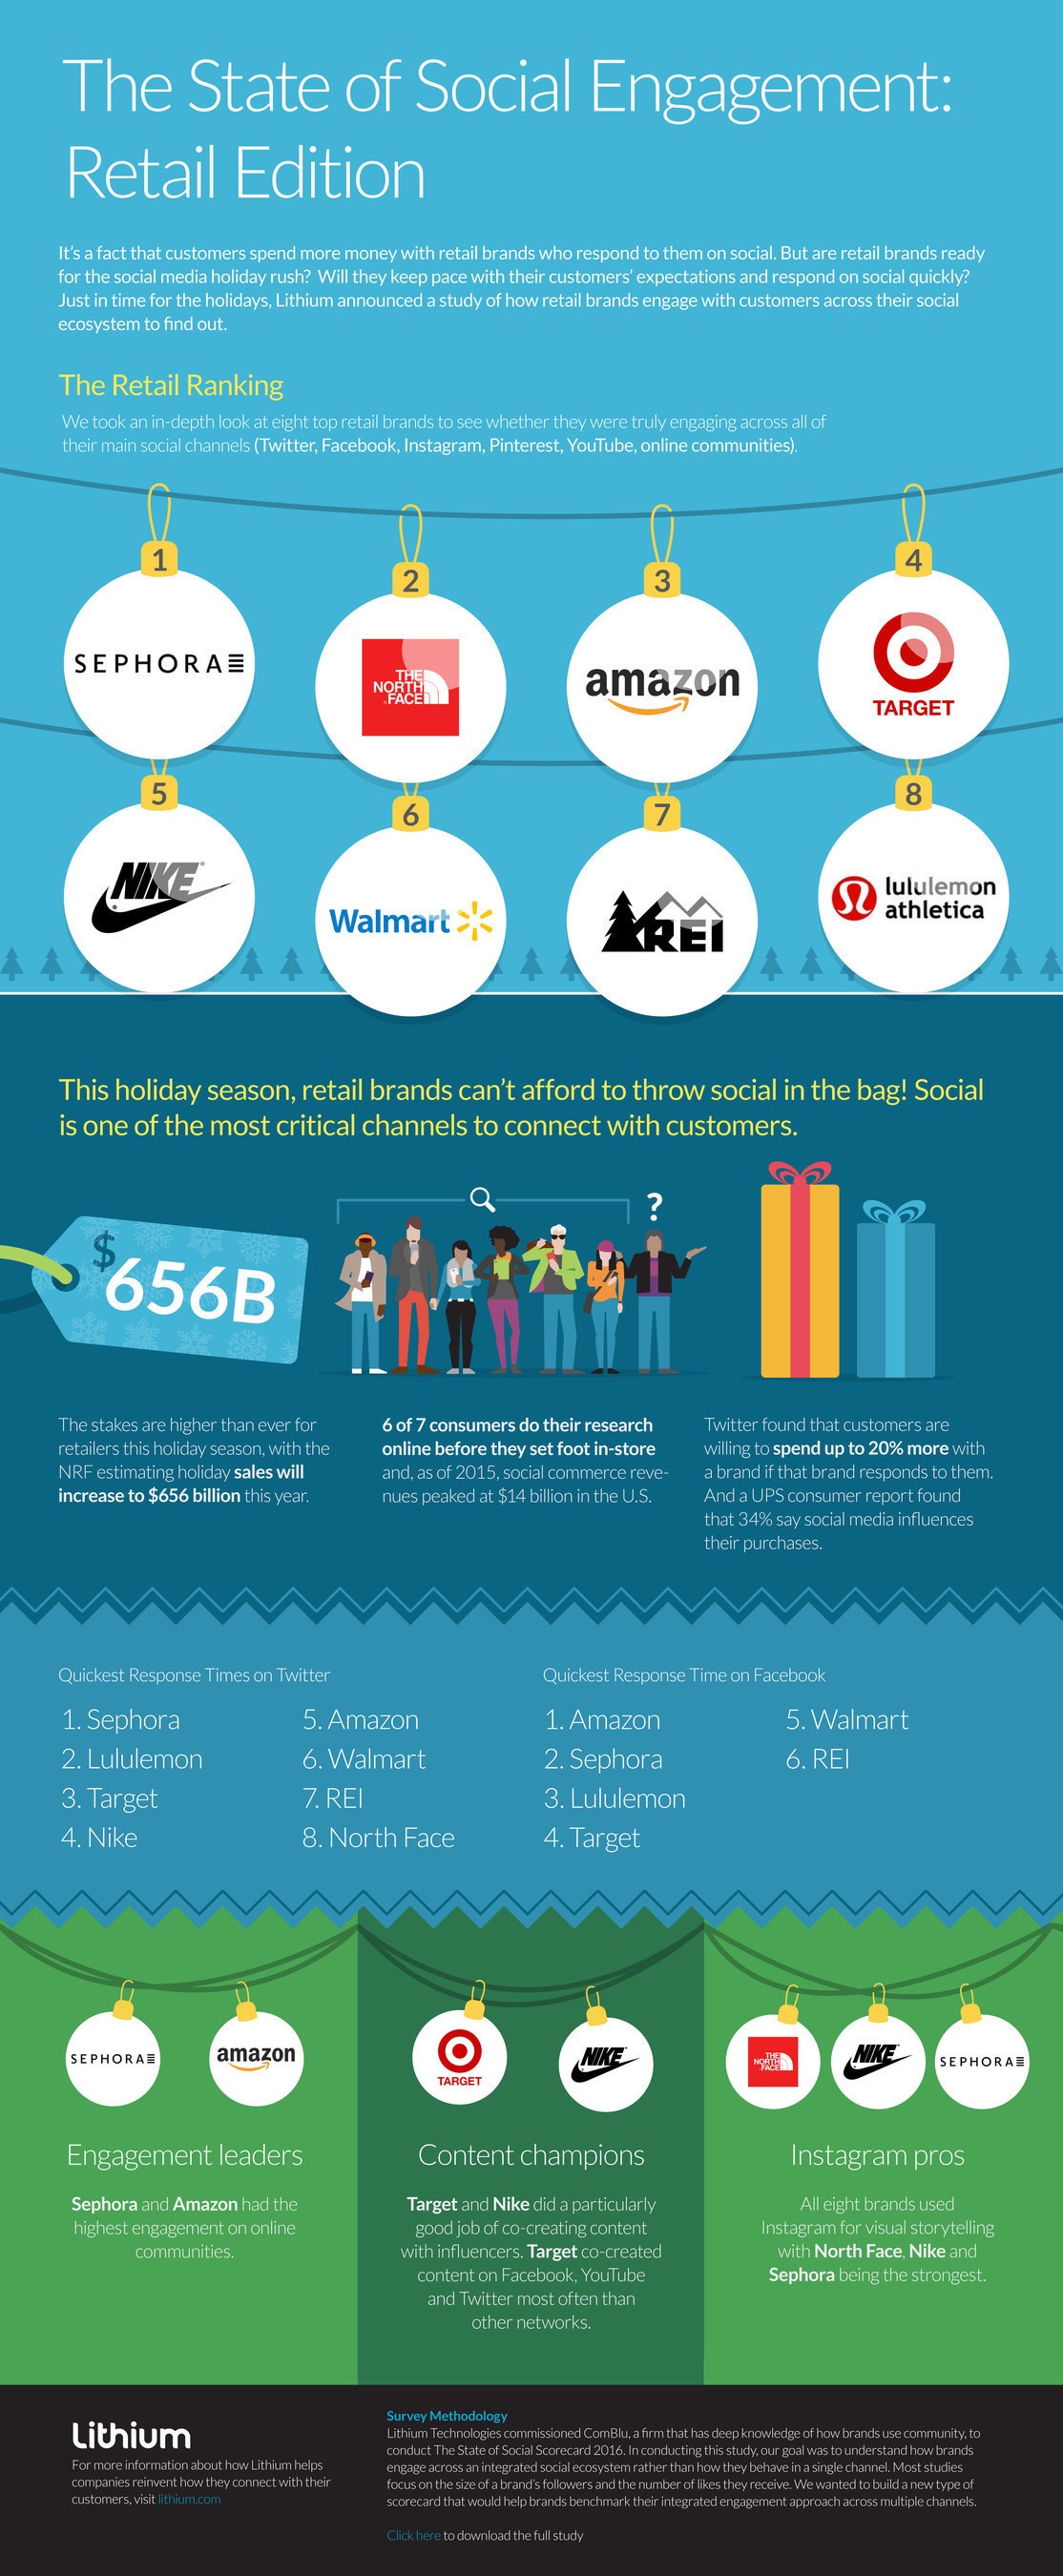 Photo: Retail brands set up shop on social media in time for holidays...